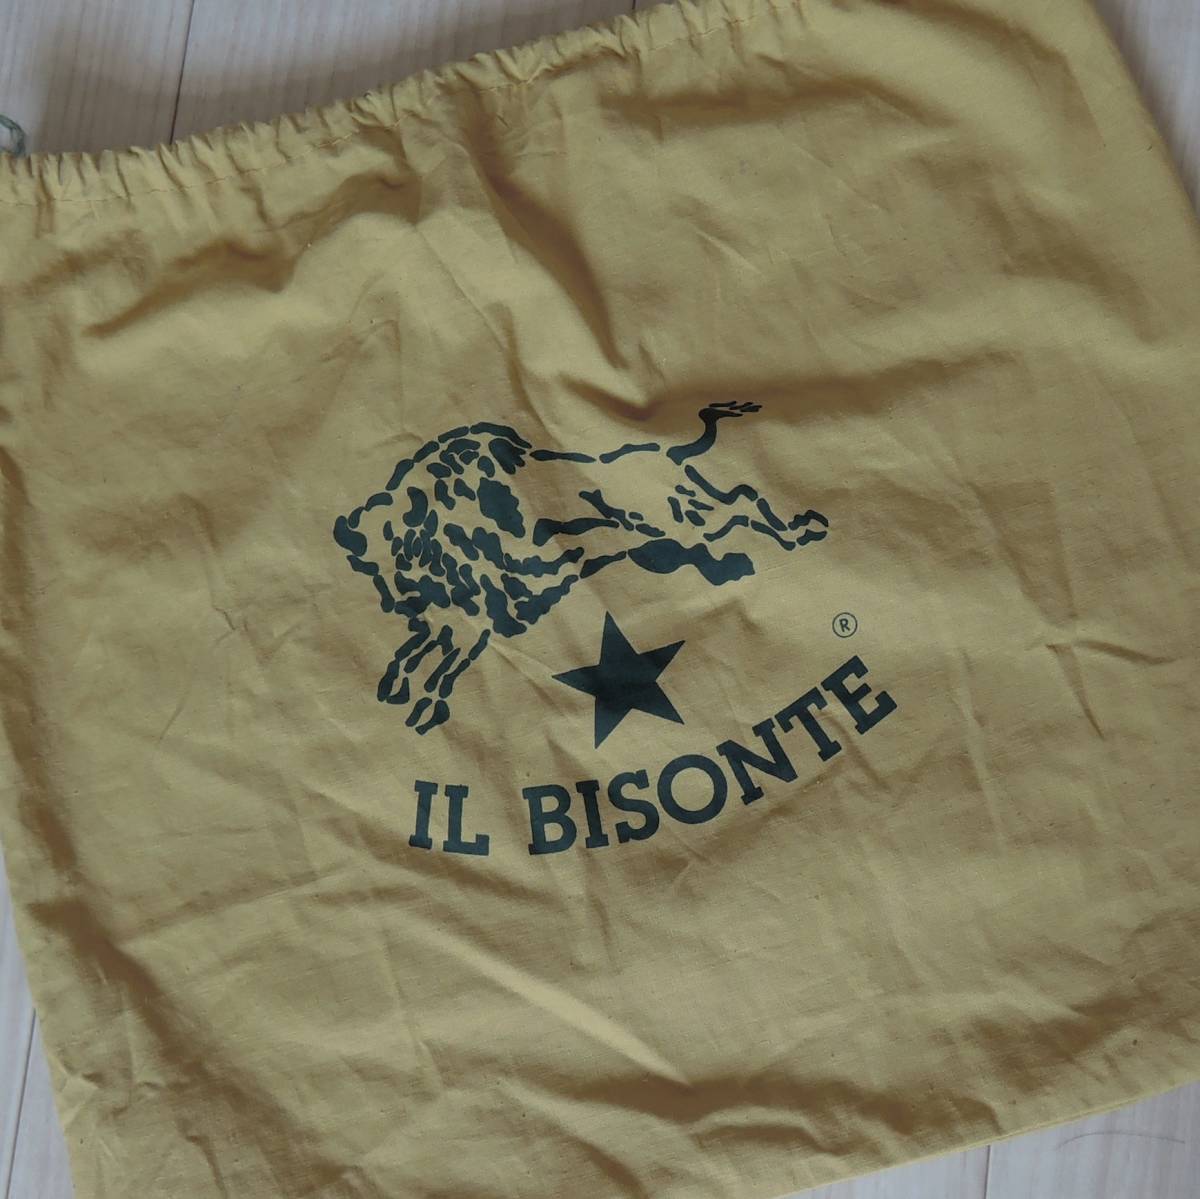  Il Bisonte IL BISONTE pouch small articles Logo used cat pohs anonymity delivery 6902